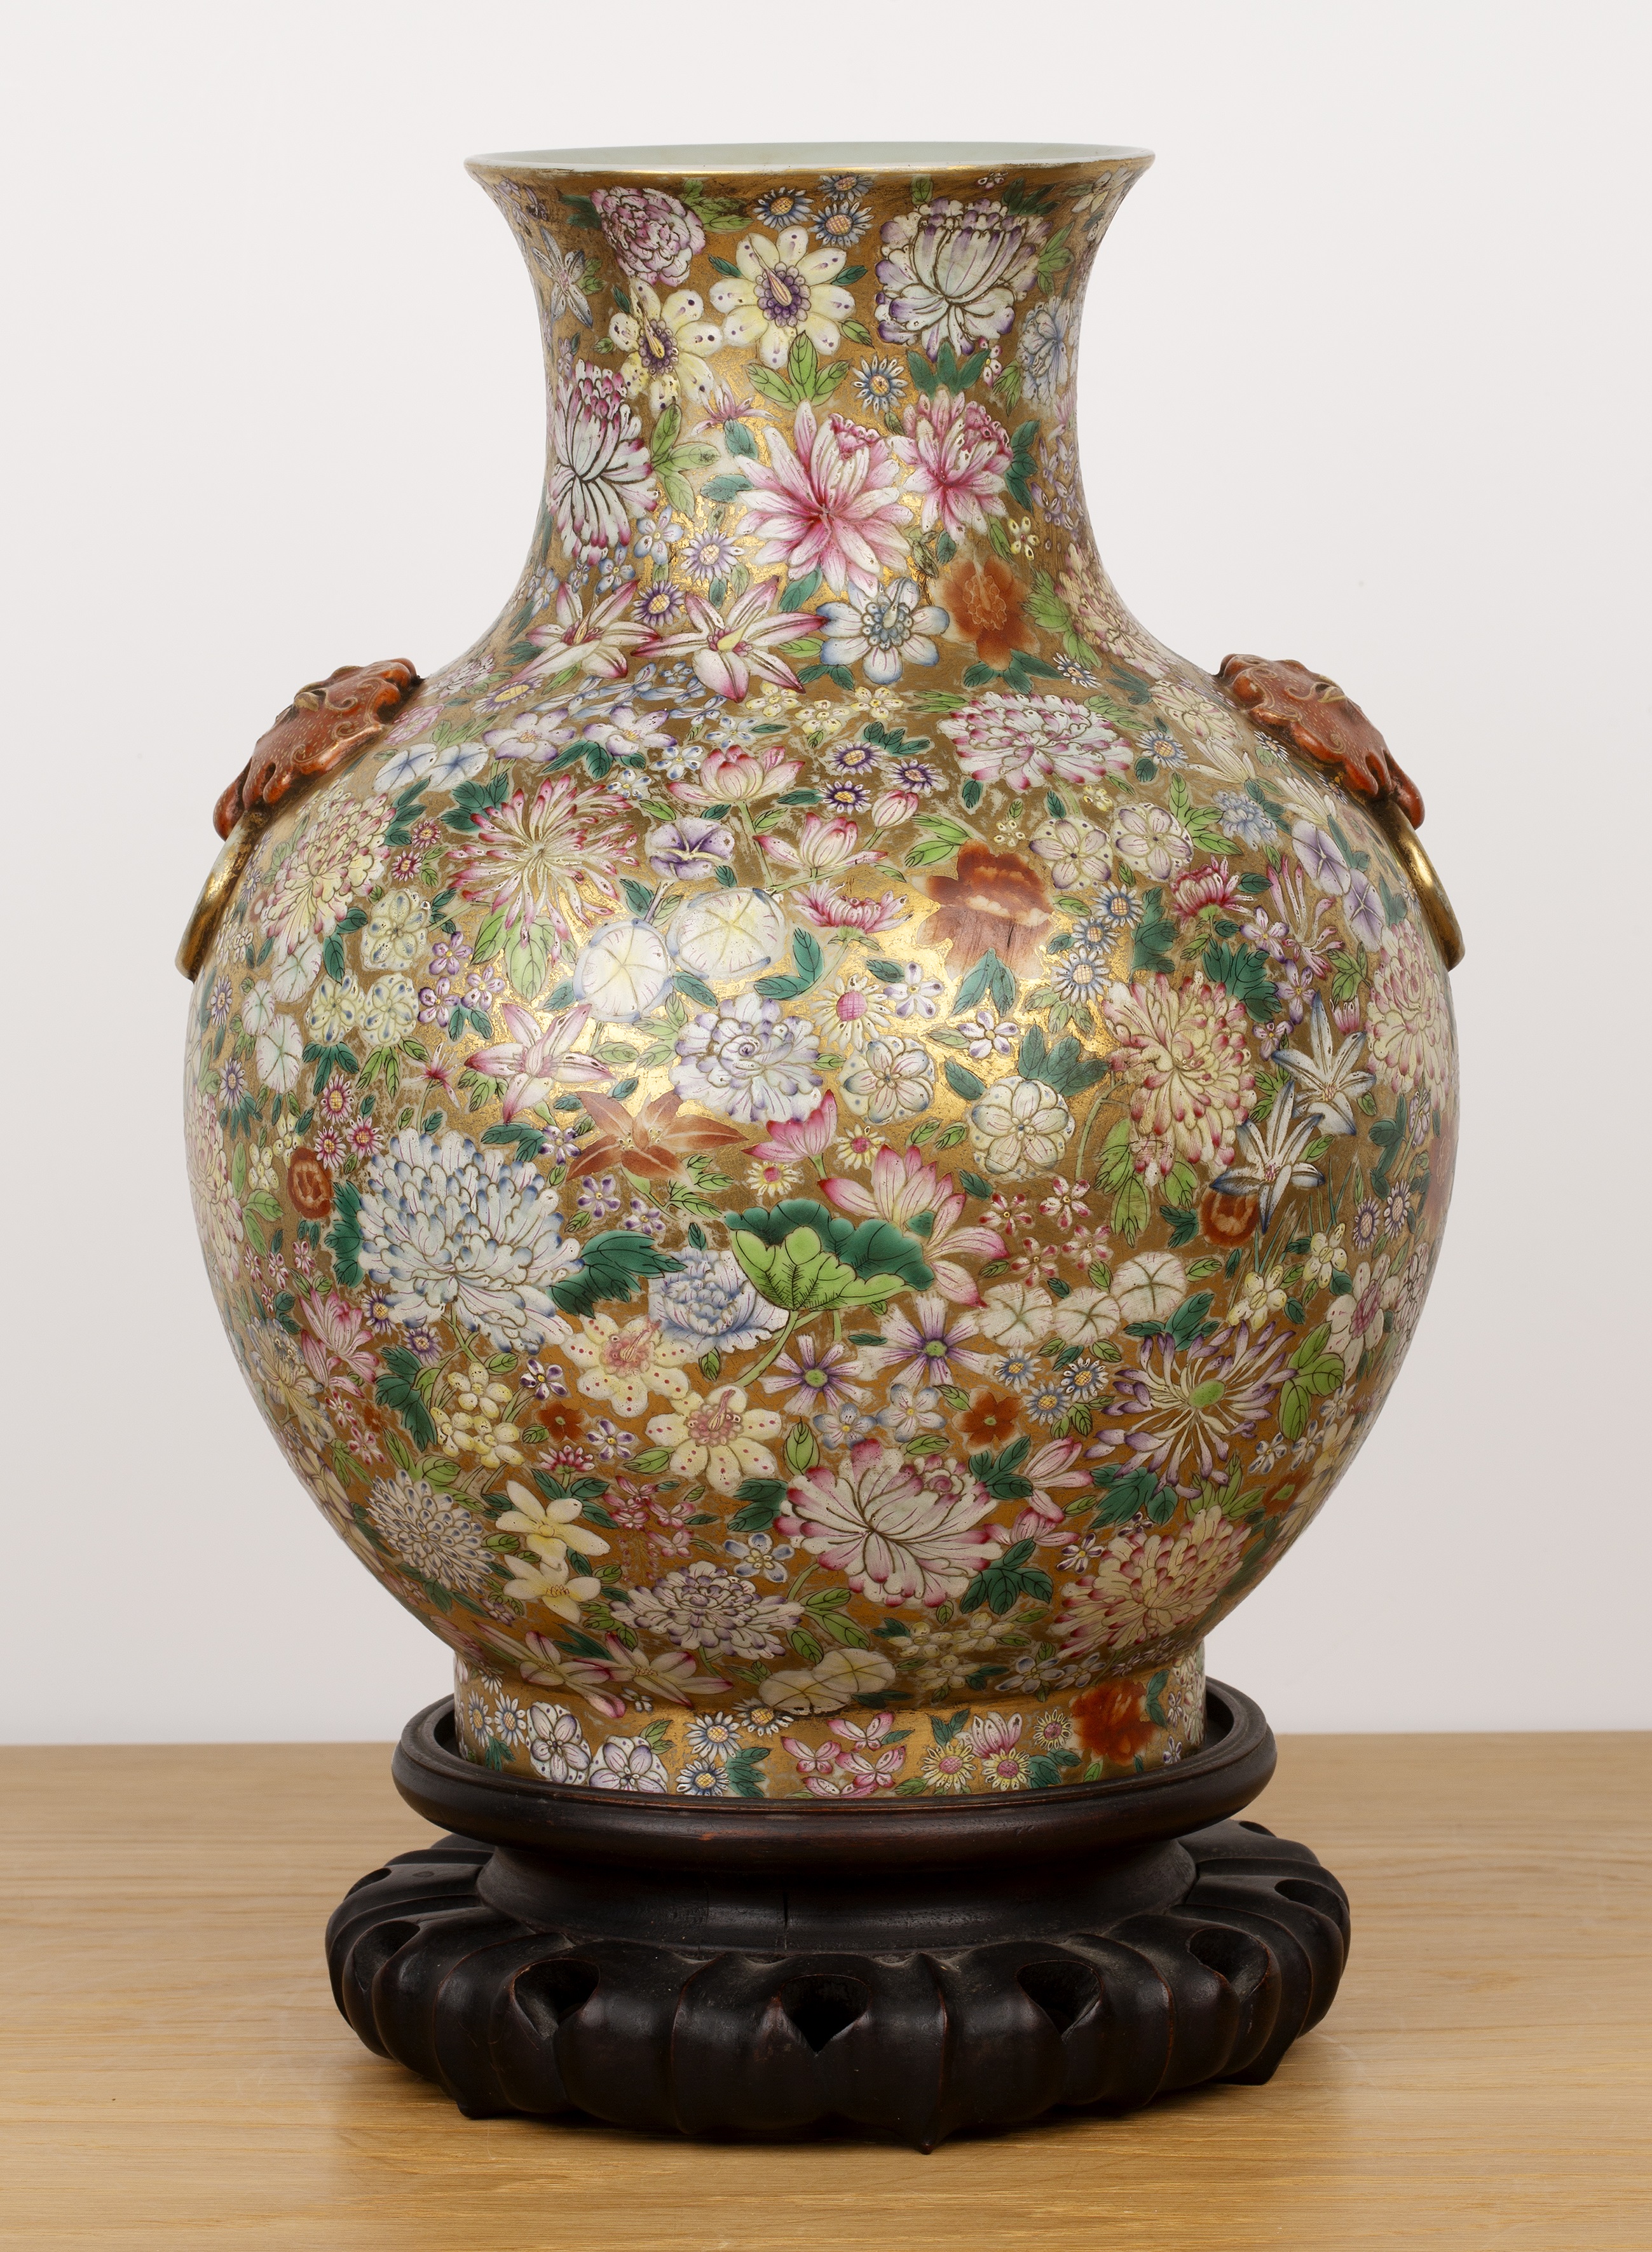 Millefleur porcelain vase and stand Chinese, circa 1900 with raised ruyi and ring handles. The - Image 3 of 10